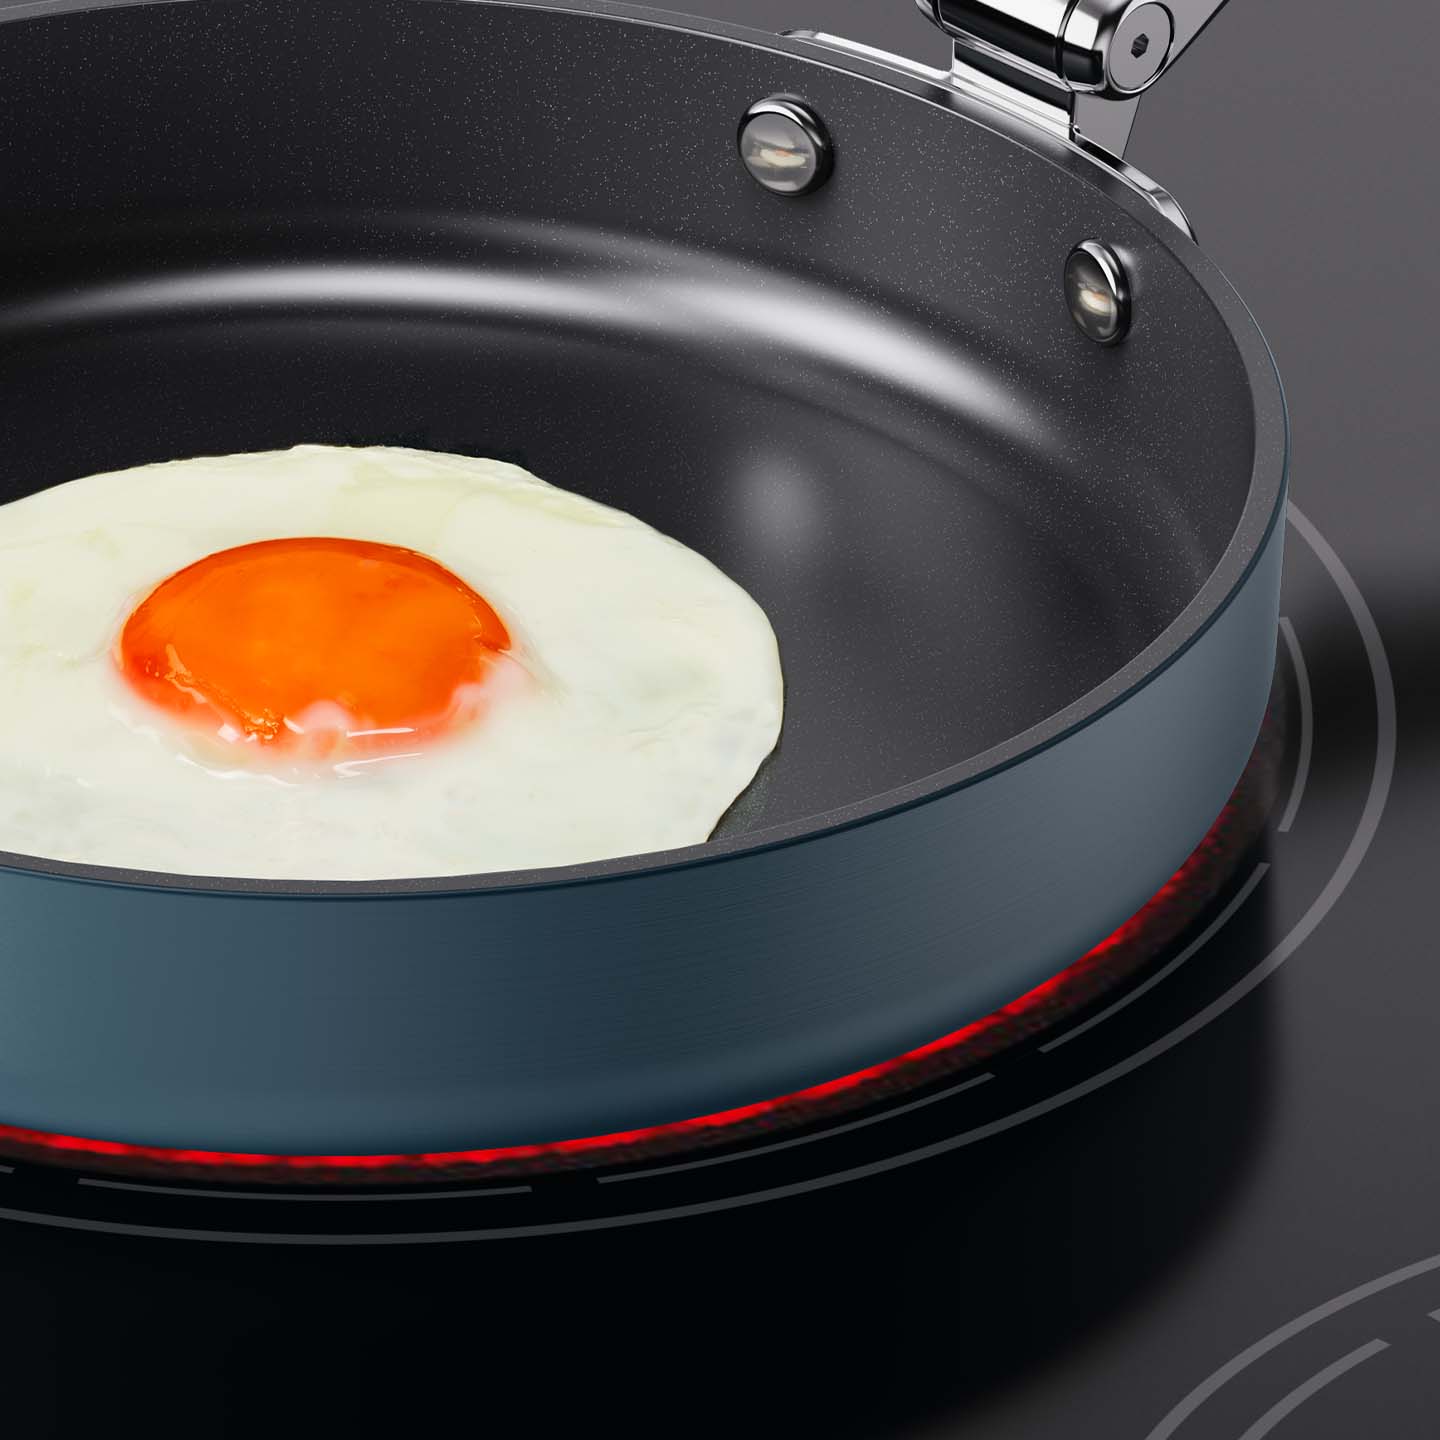 Space Cookware Blue Frying Pan Cooking Egg on Induction Hob | Joseph Joseph